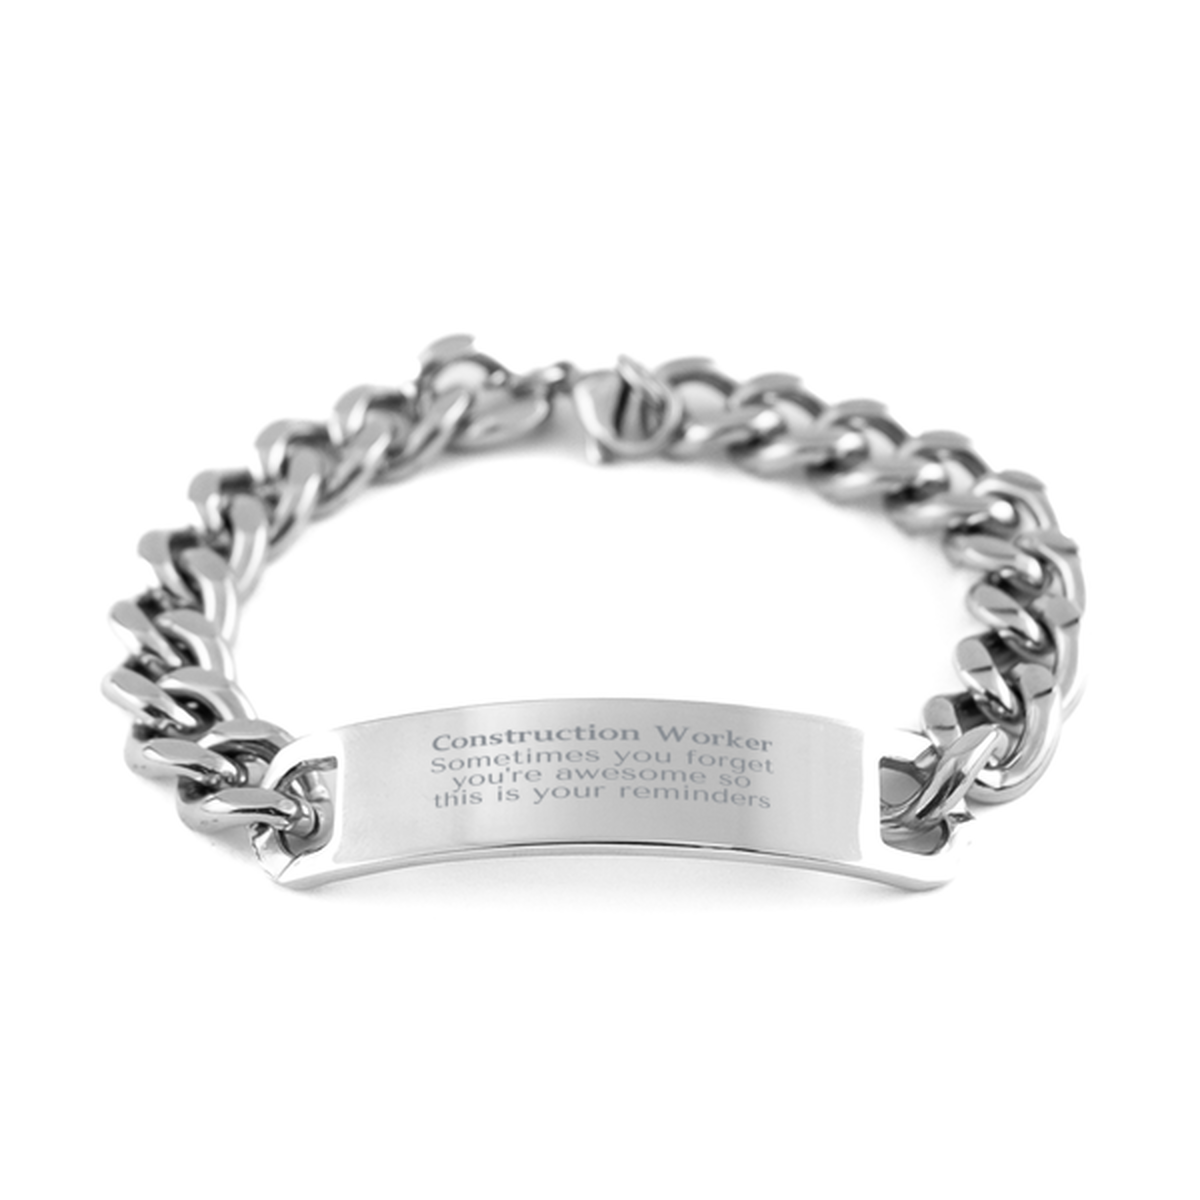 Sentimental Construction Worker Cuban Chain Stainless Steel Bracelet, Construction Worker Sometimes you forget you're awesome so this is your reminders, Graduation Christmas Birthday Gifts for Construction Worker, Men, Women, Coworkers